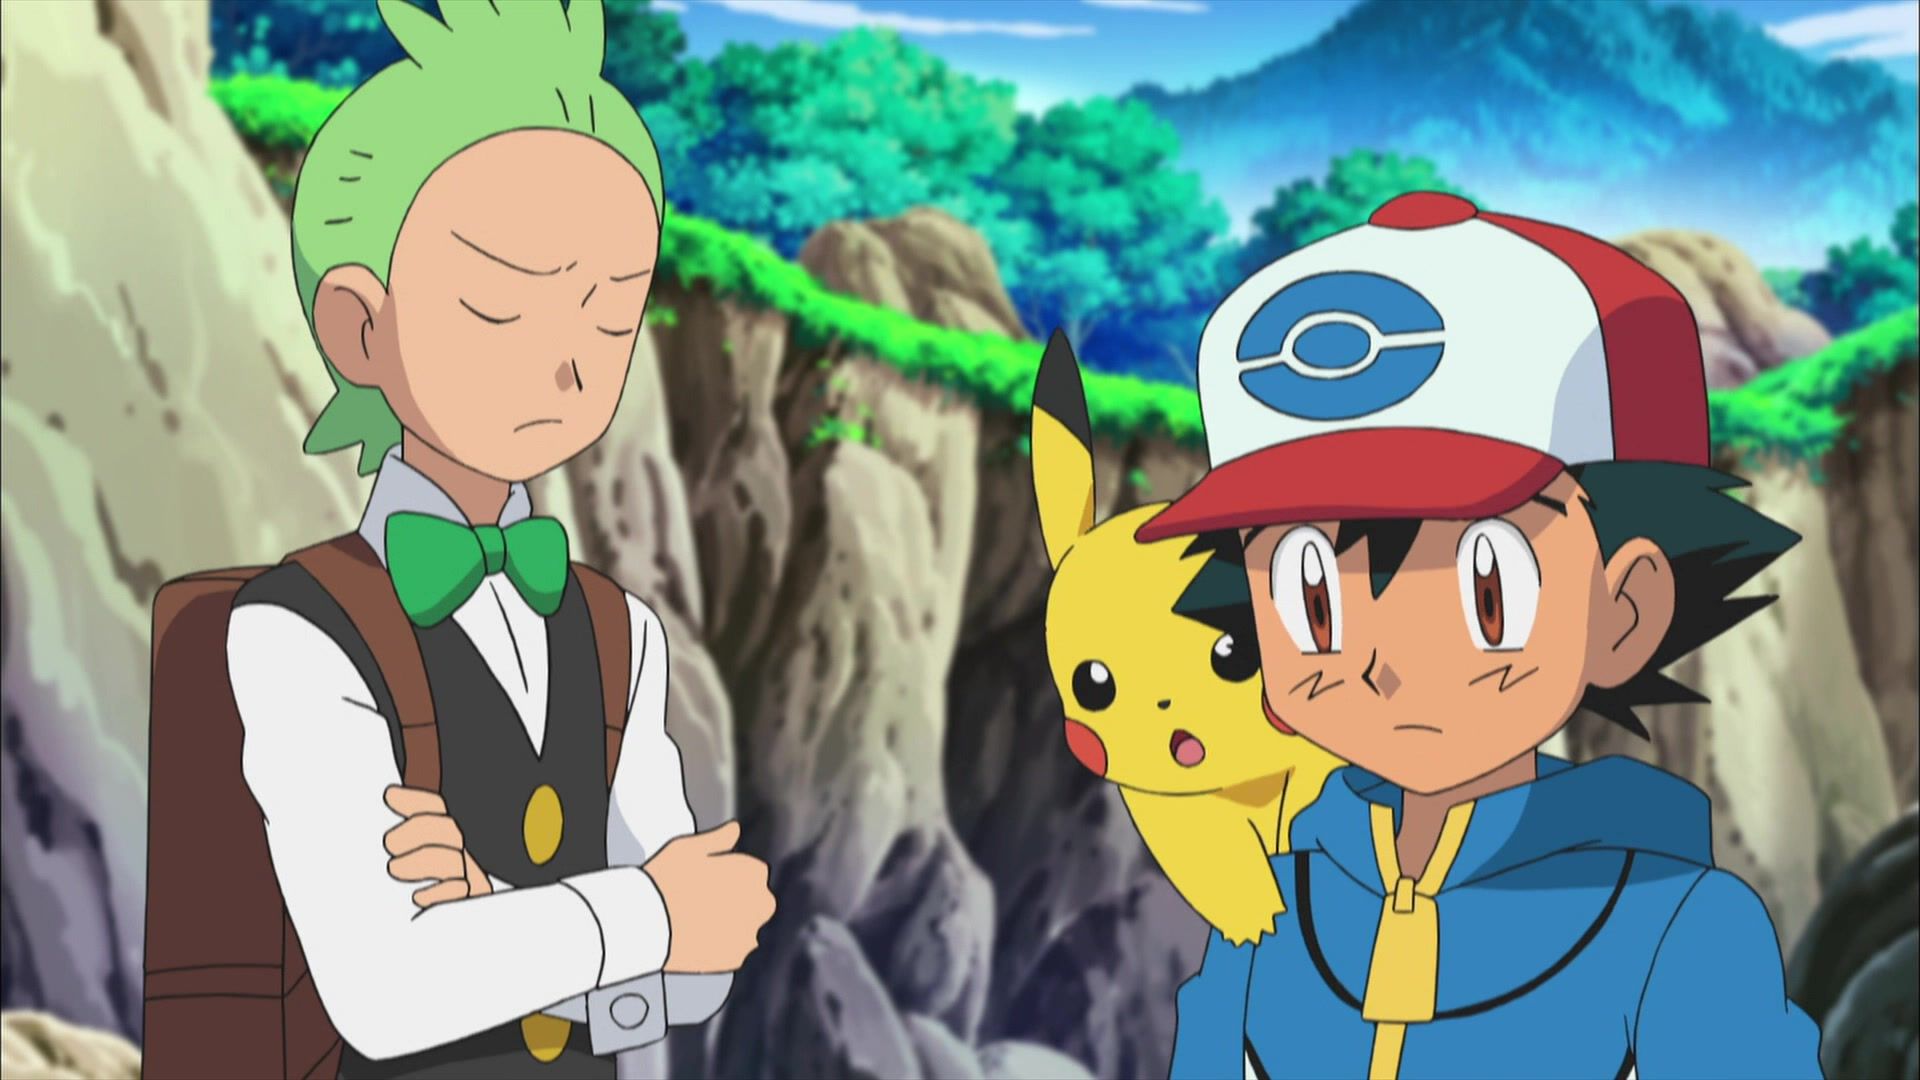 Pokemon: Black and White (Best Wishes!) Screencaps, Screenshots, Image, Wallpaper, & Picture